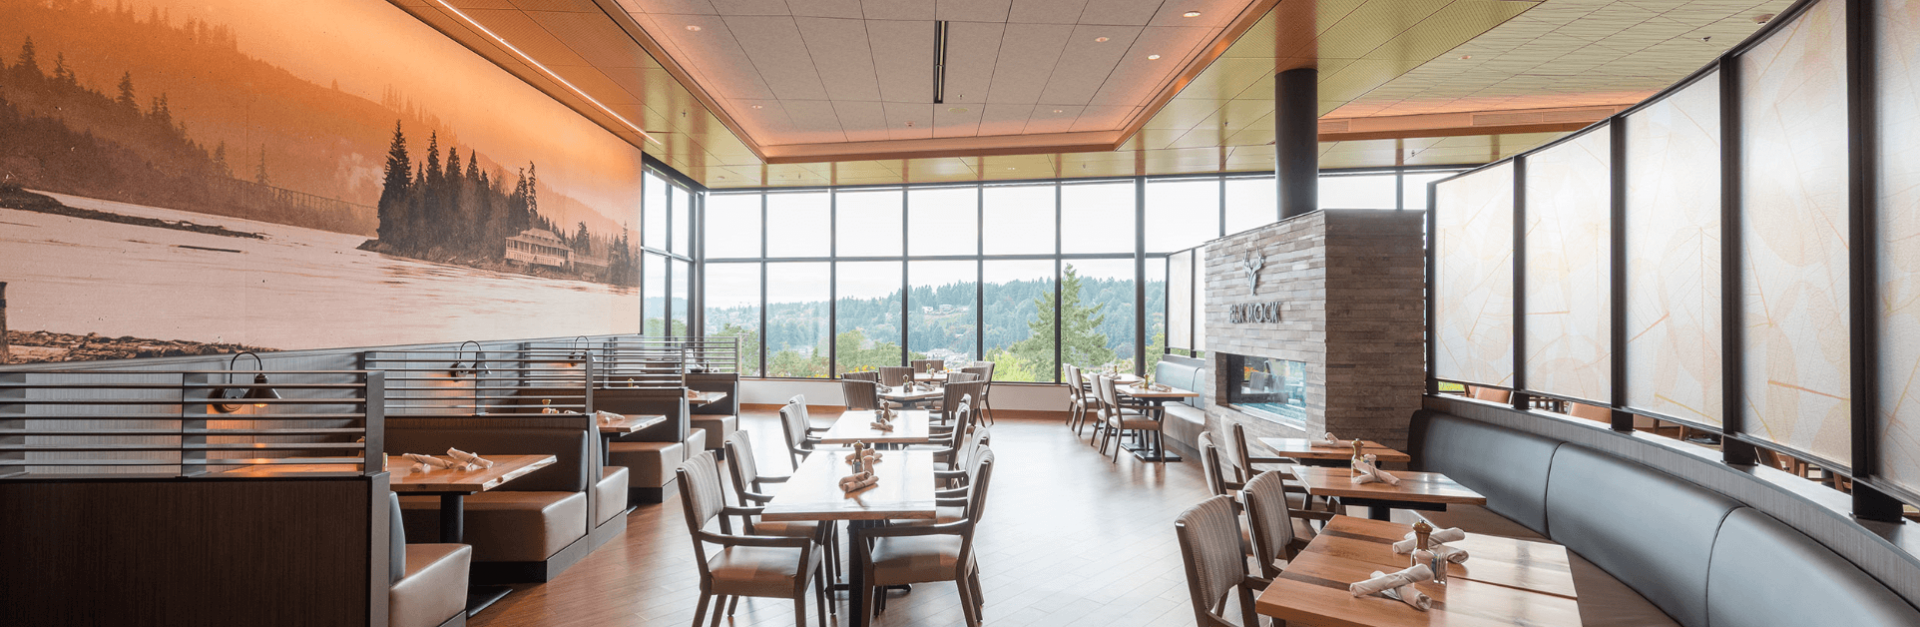 Elk Rock dining room with tall windows and a historic mural of the Willamette River